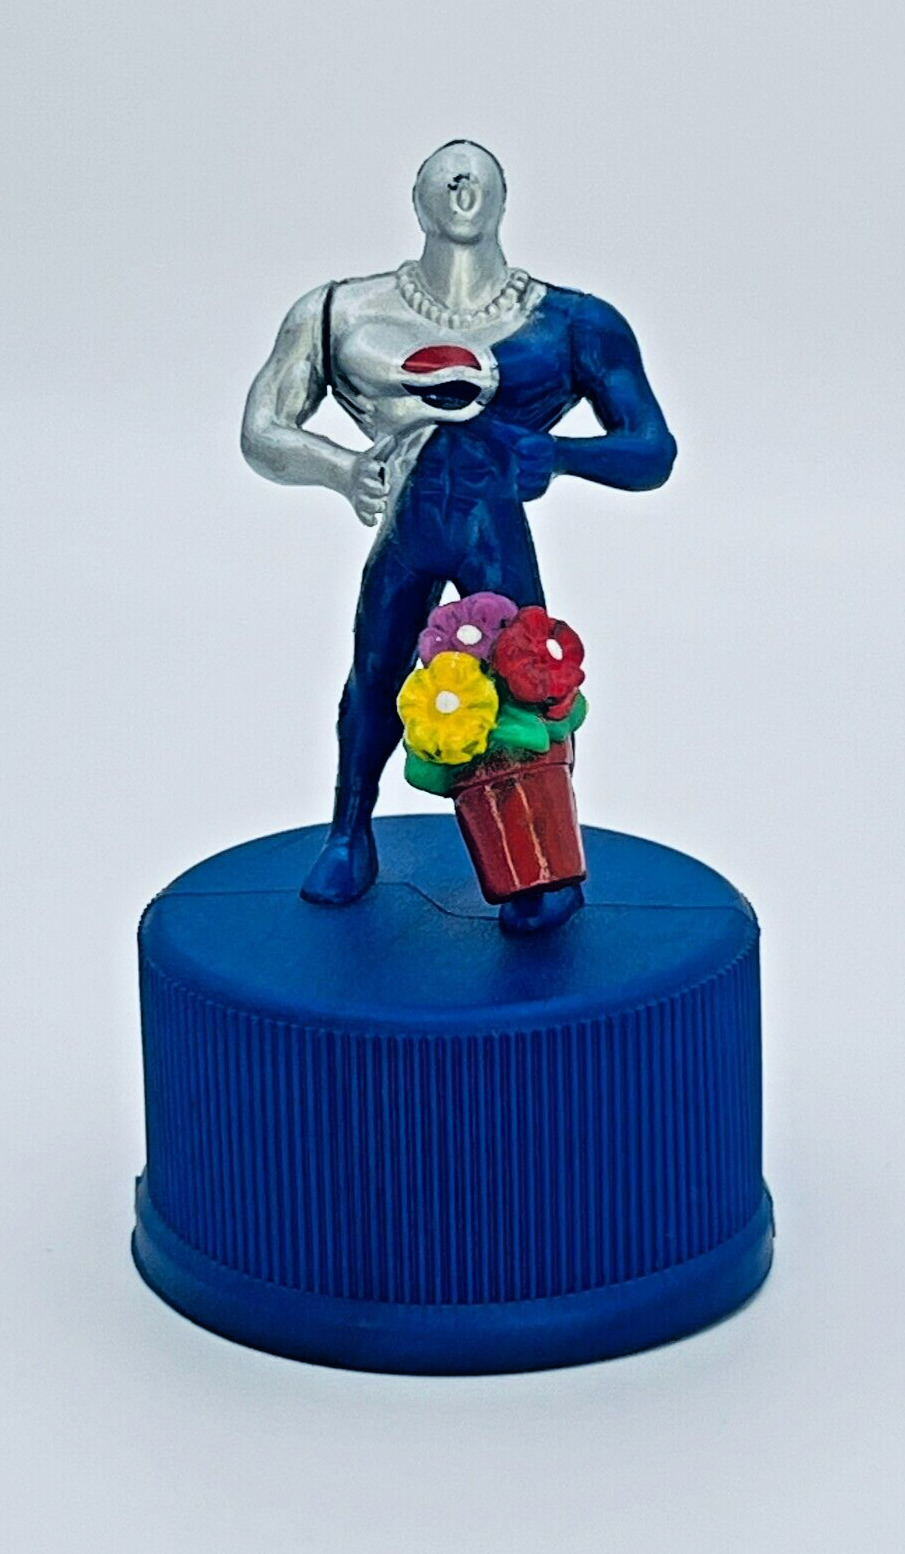 OUCH Pepsiman A-6 Bottle Cap Figure Pepsi Limited Mascot Anime Japanese